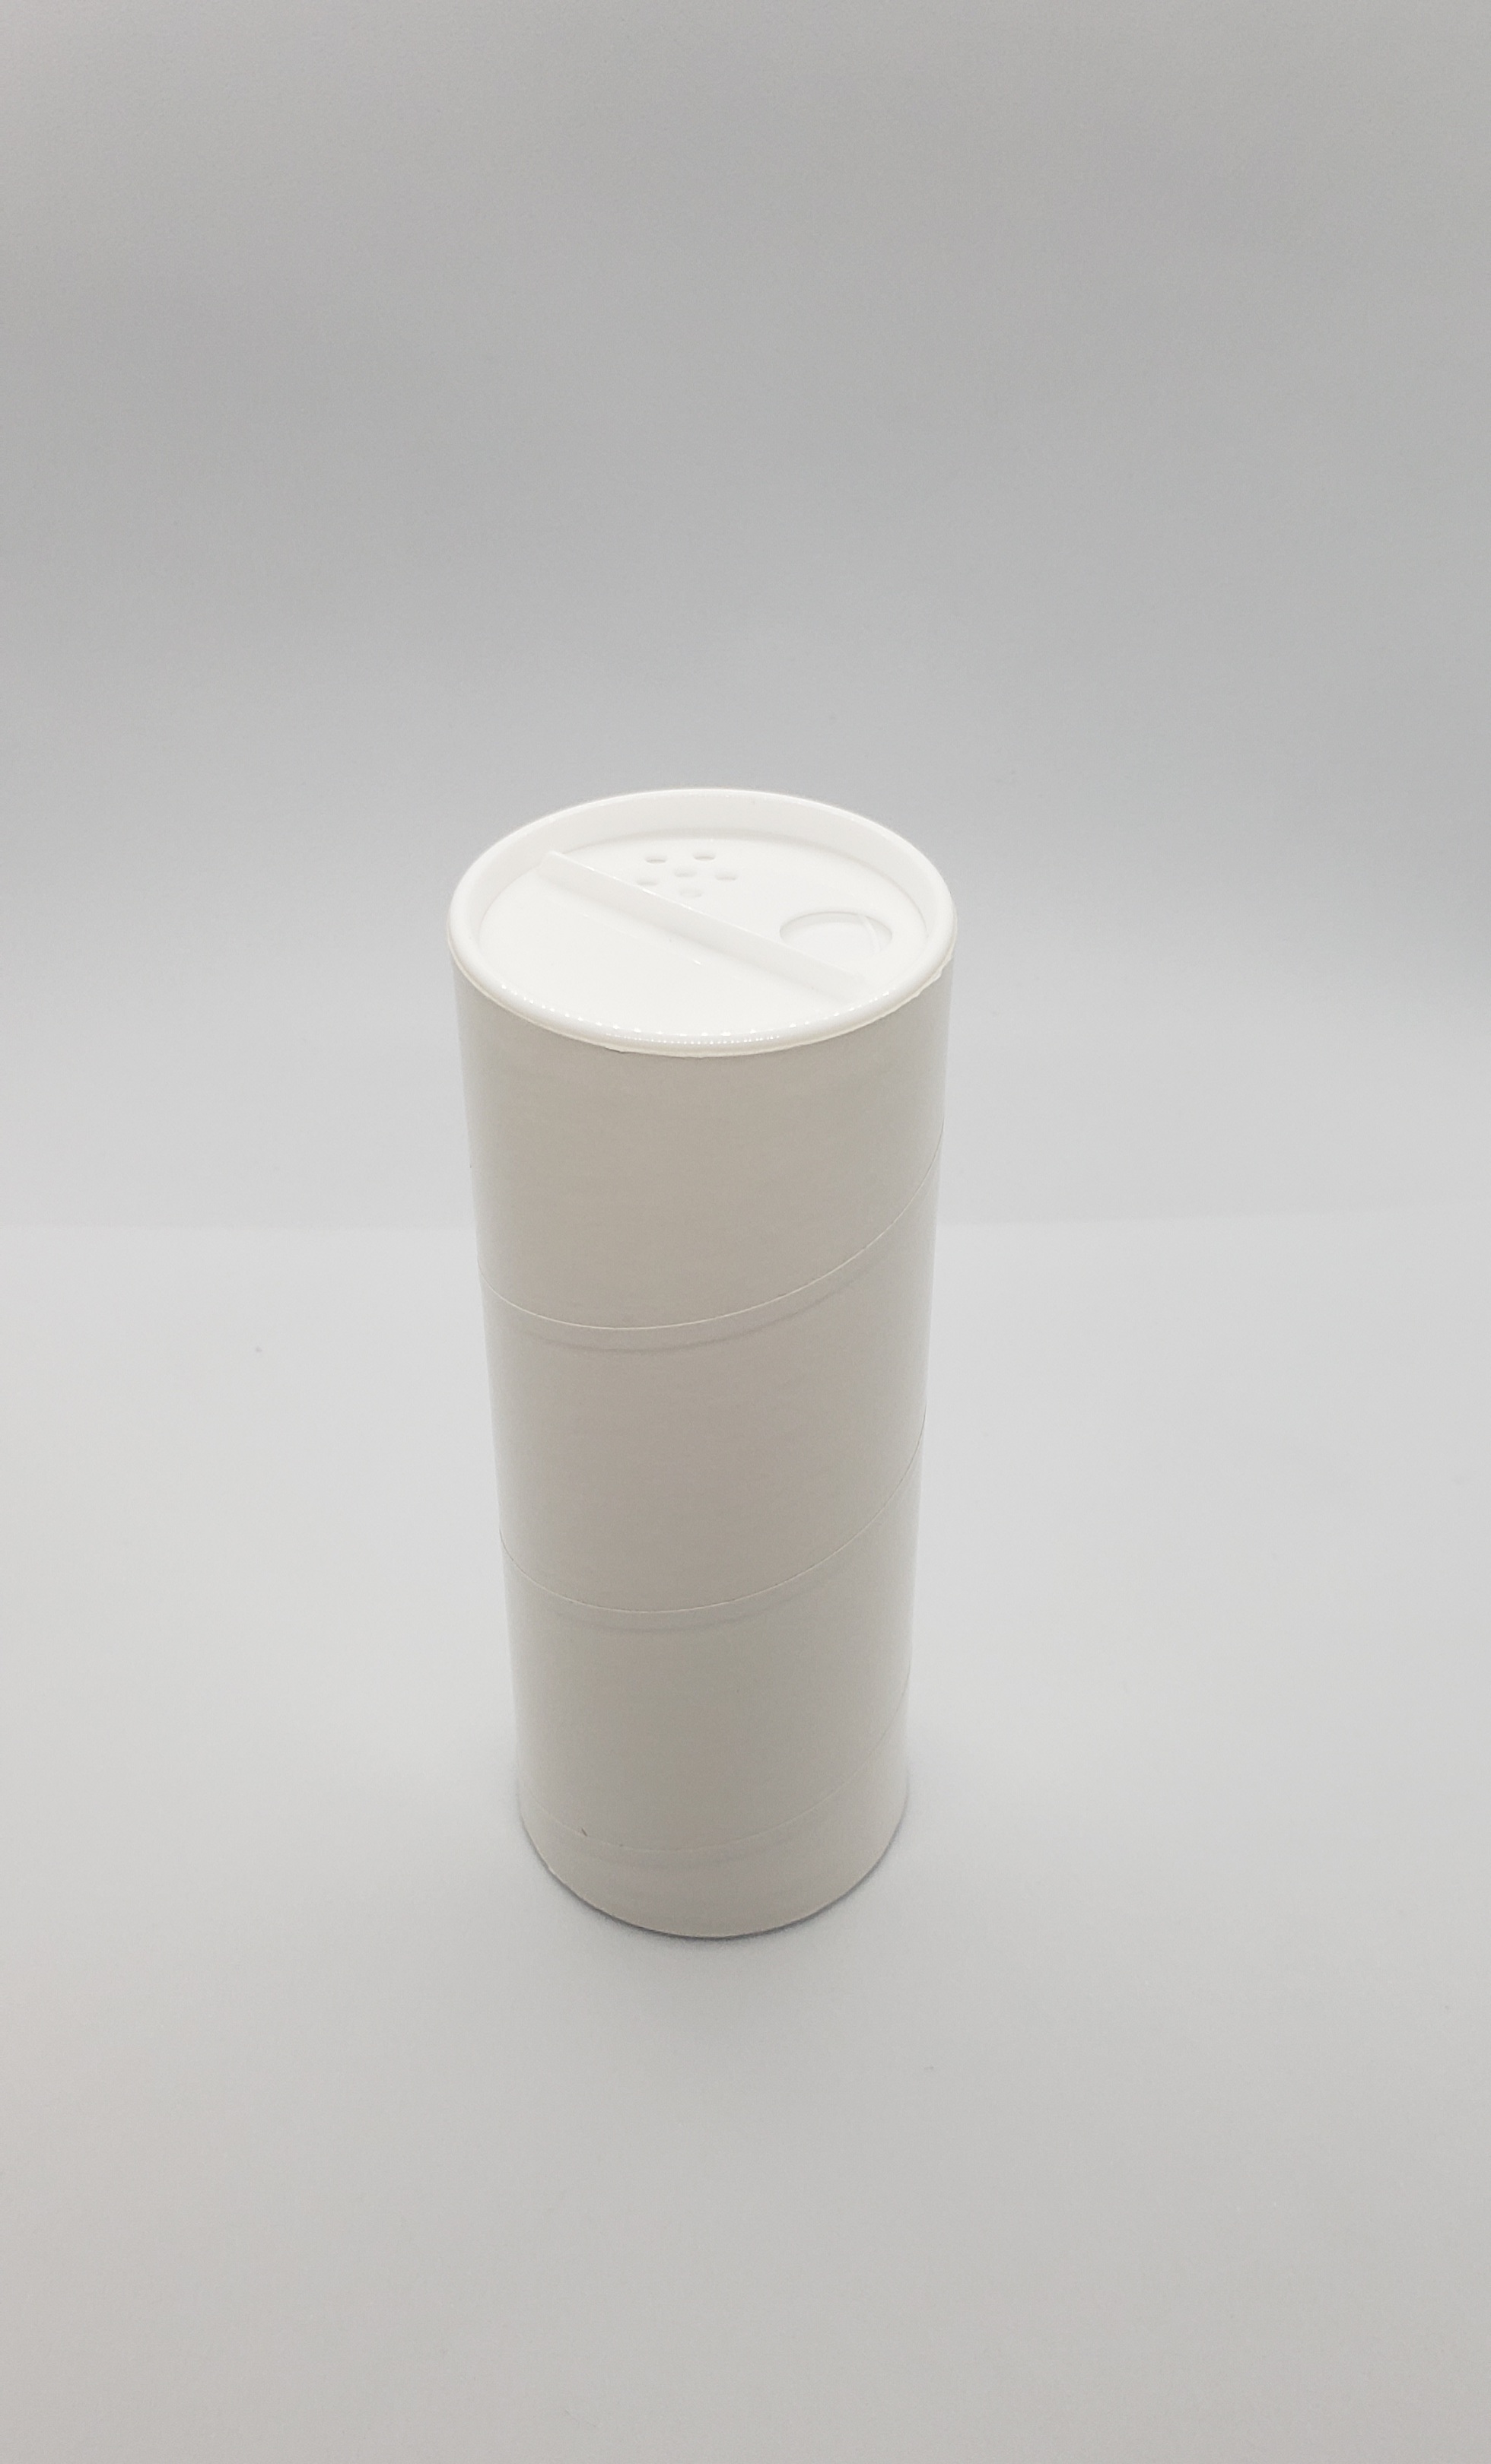 https://www.forsoapmakers.com/images/product/powder%20shaker%20vertical.jpg